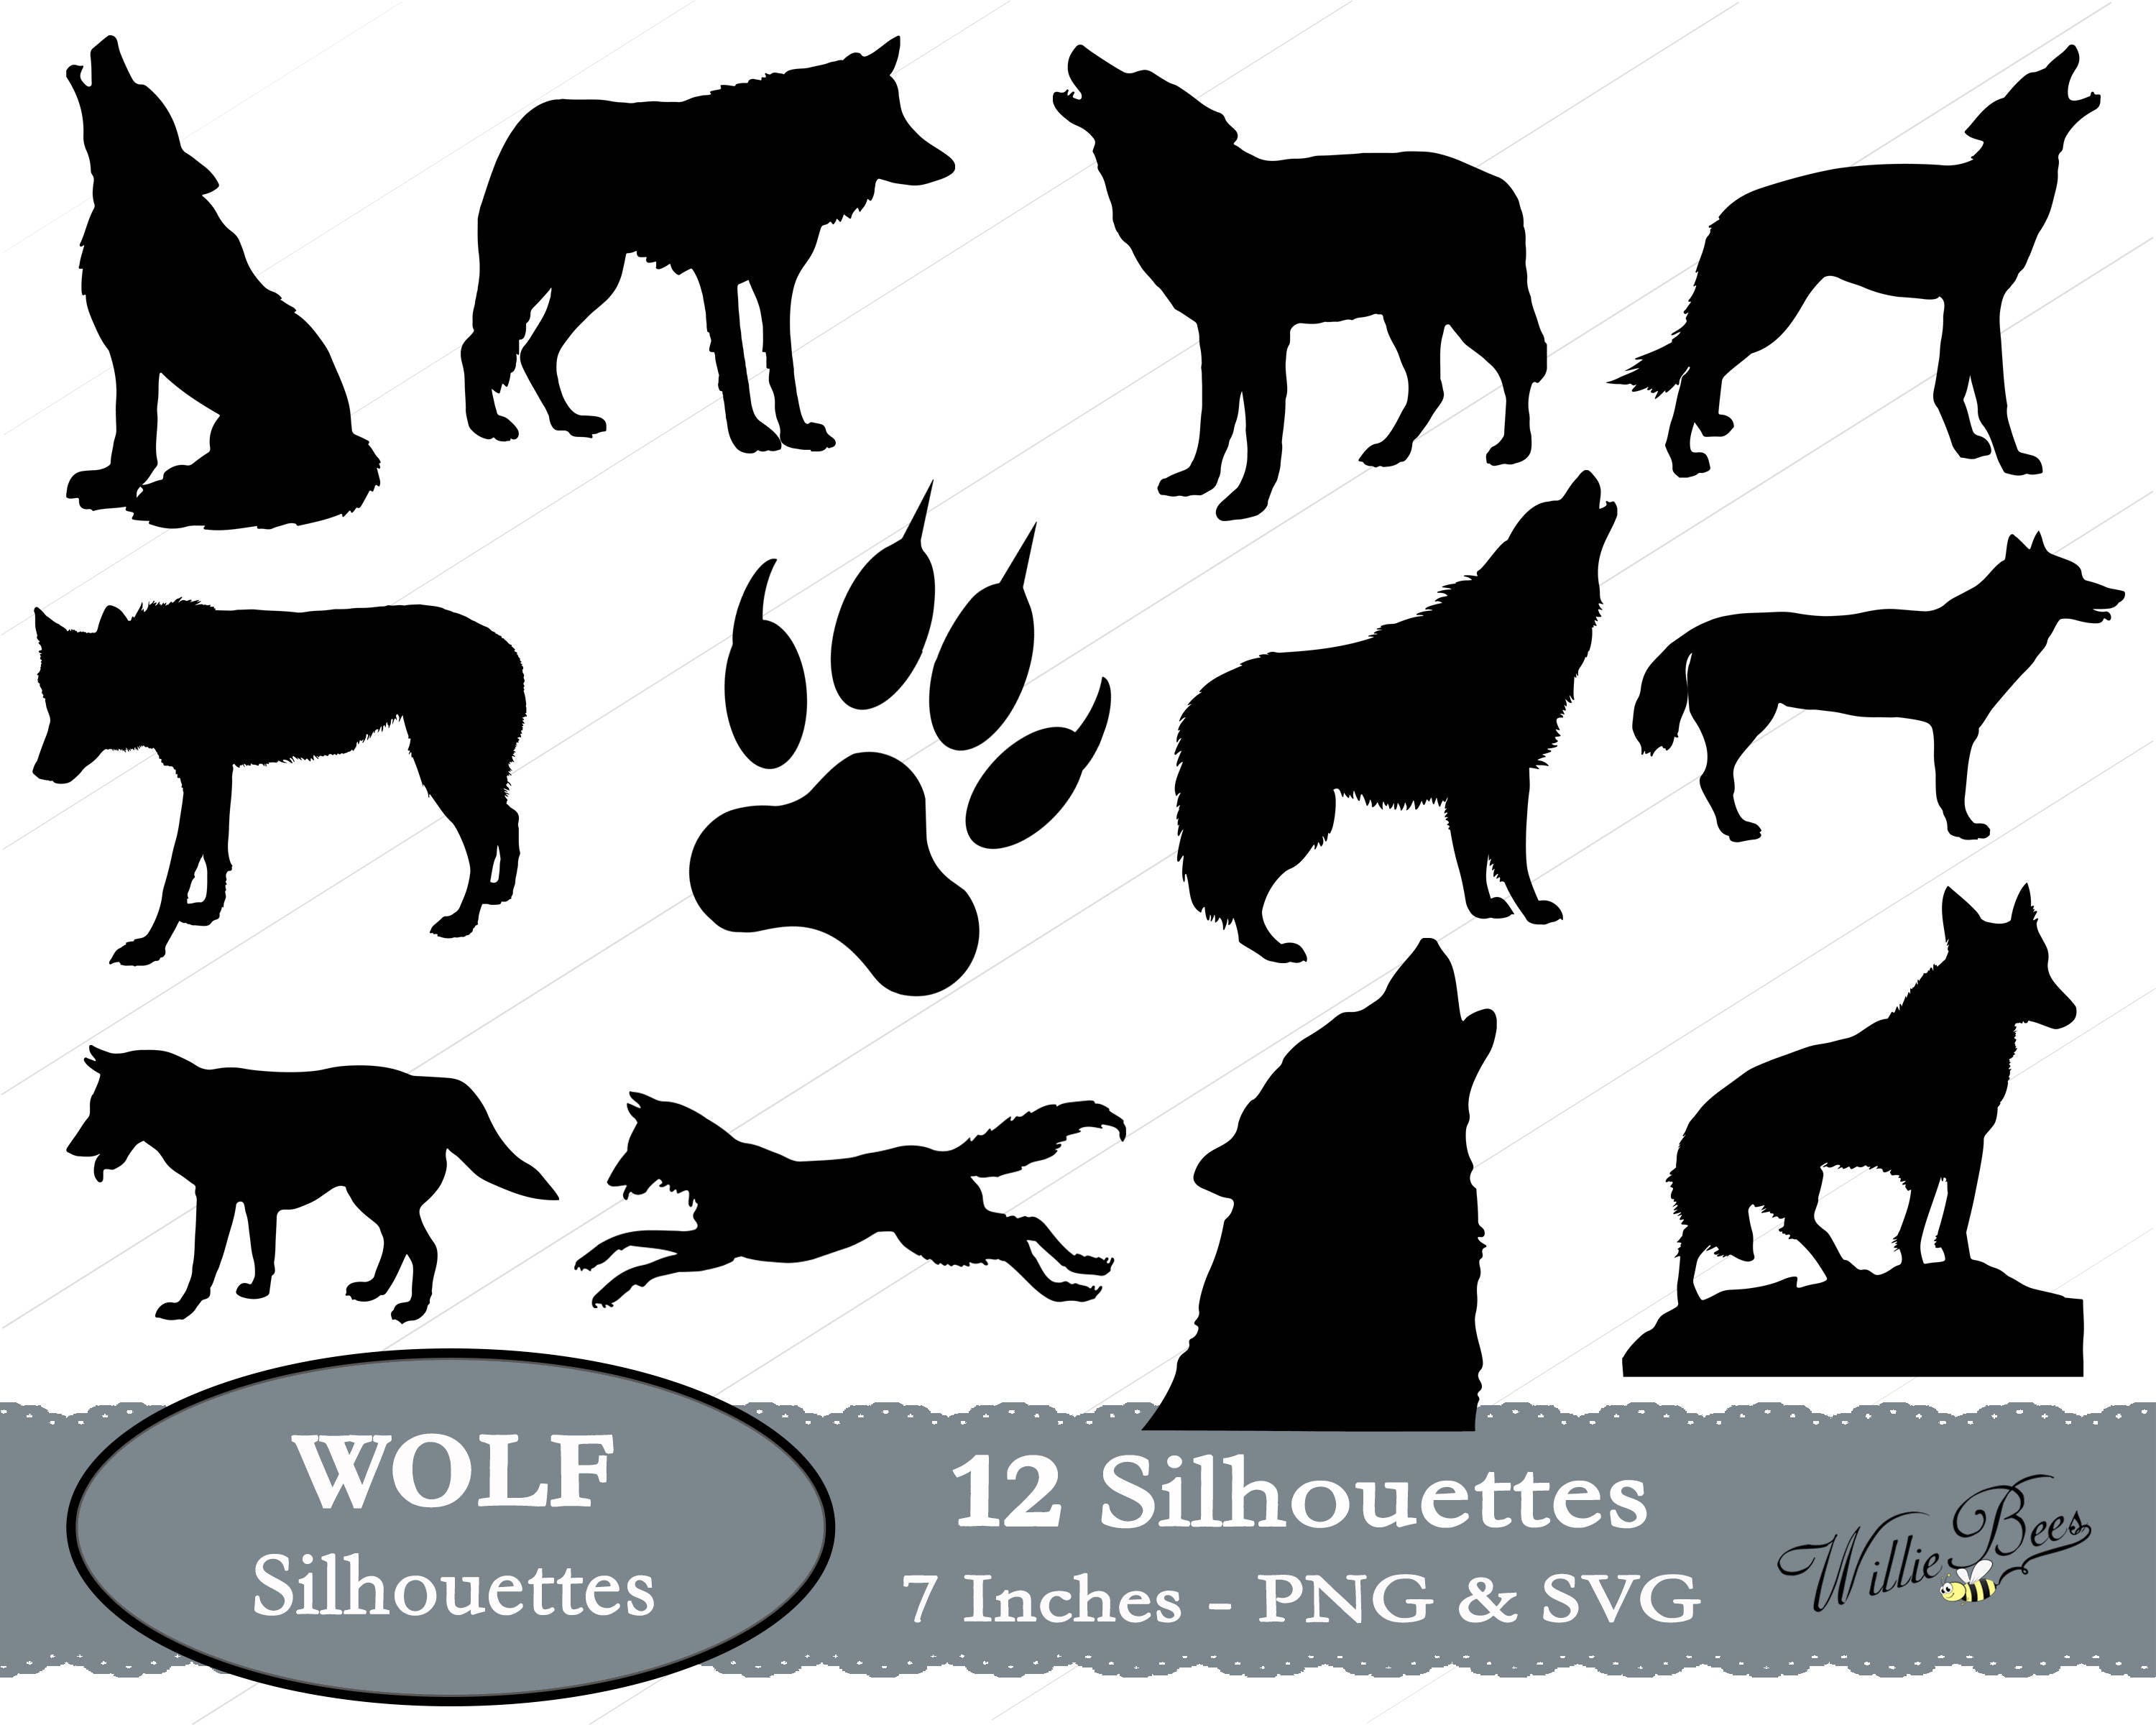 Download Wolf SVG, Wolf Silhouette Clip Art, Wolves, Timber Wolf ...